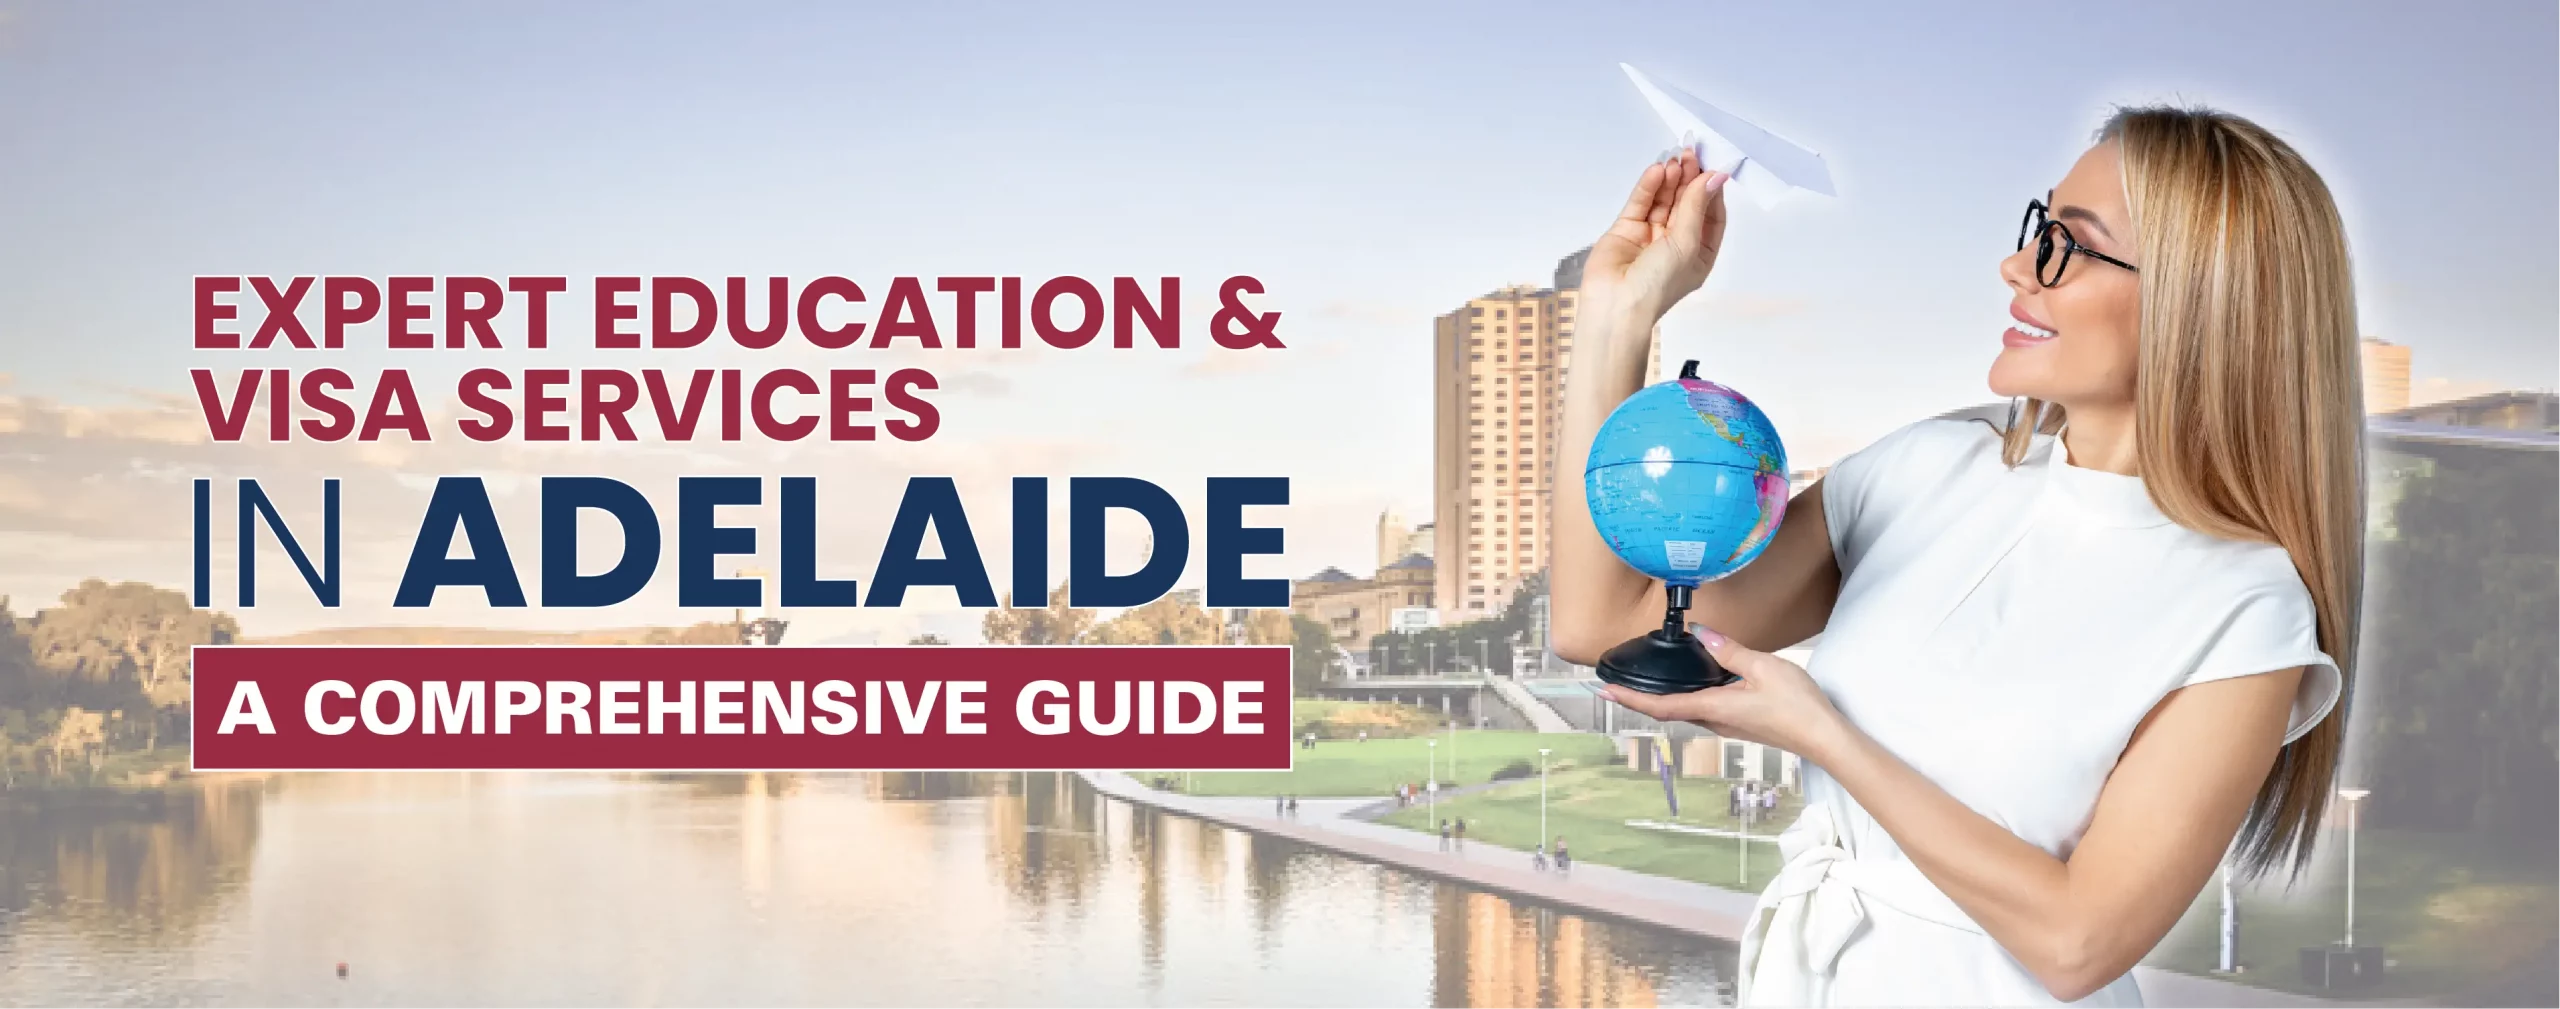 Expert Education and Visa Services in Adelaide: A Comprehensive Guide